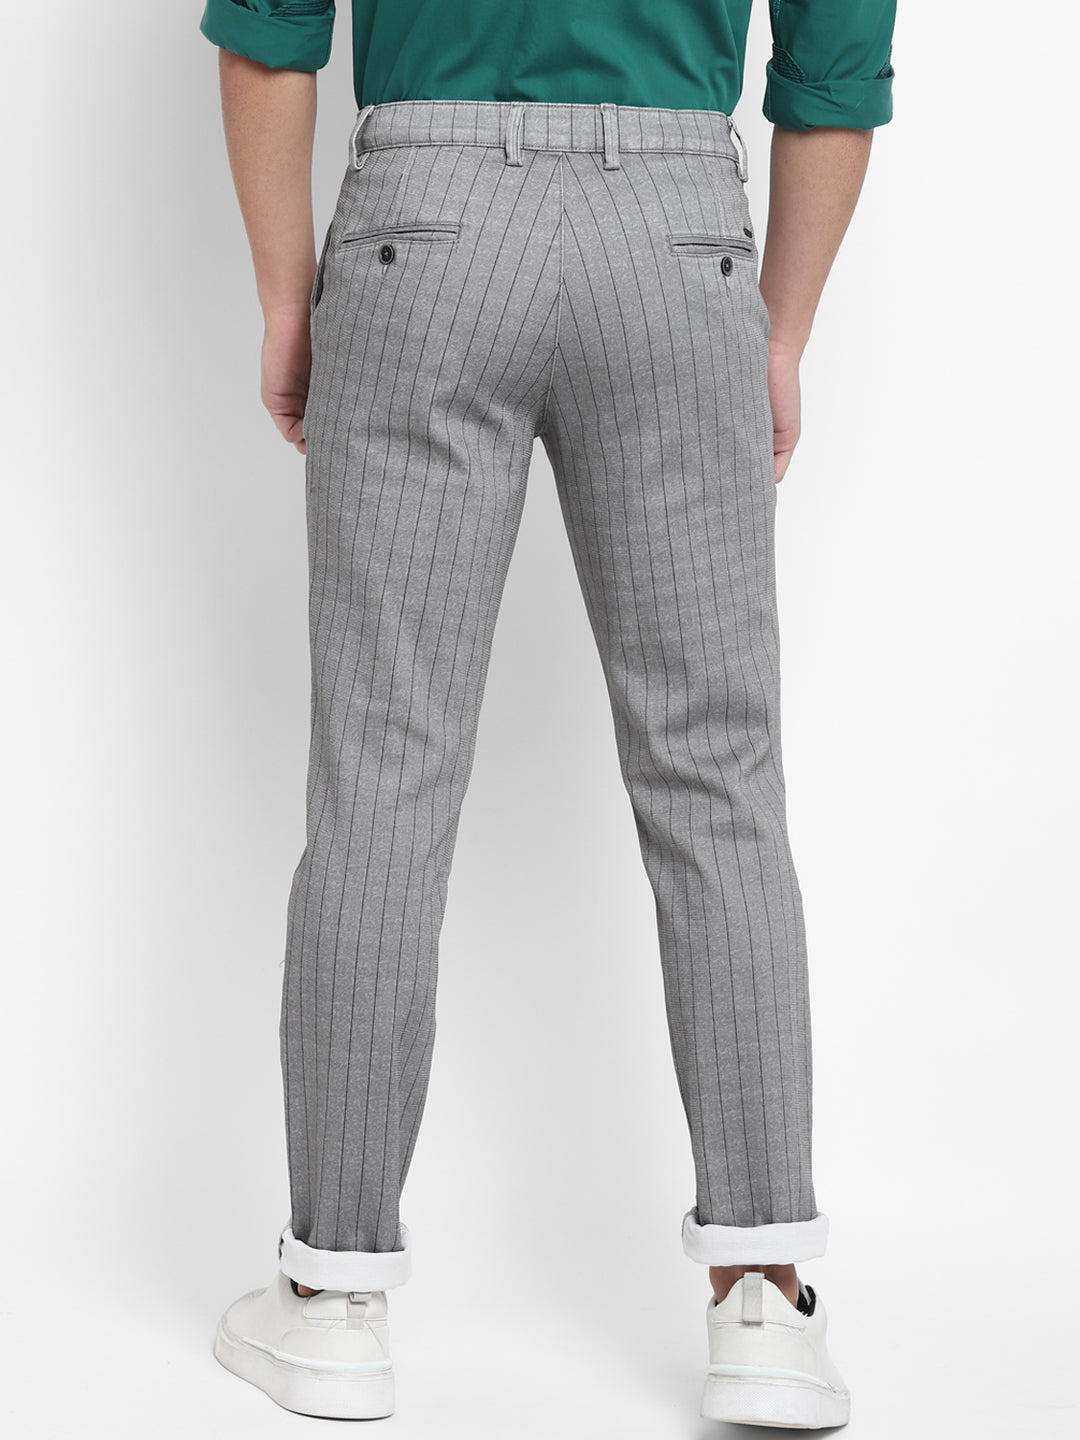 Cotton Stretch Grey Striped Narrow Fit Flat Front Casual Trouser